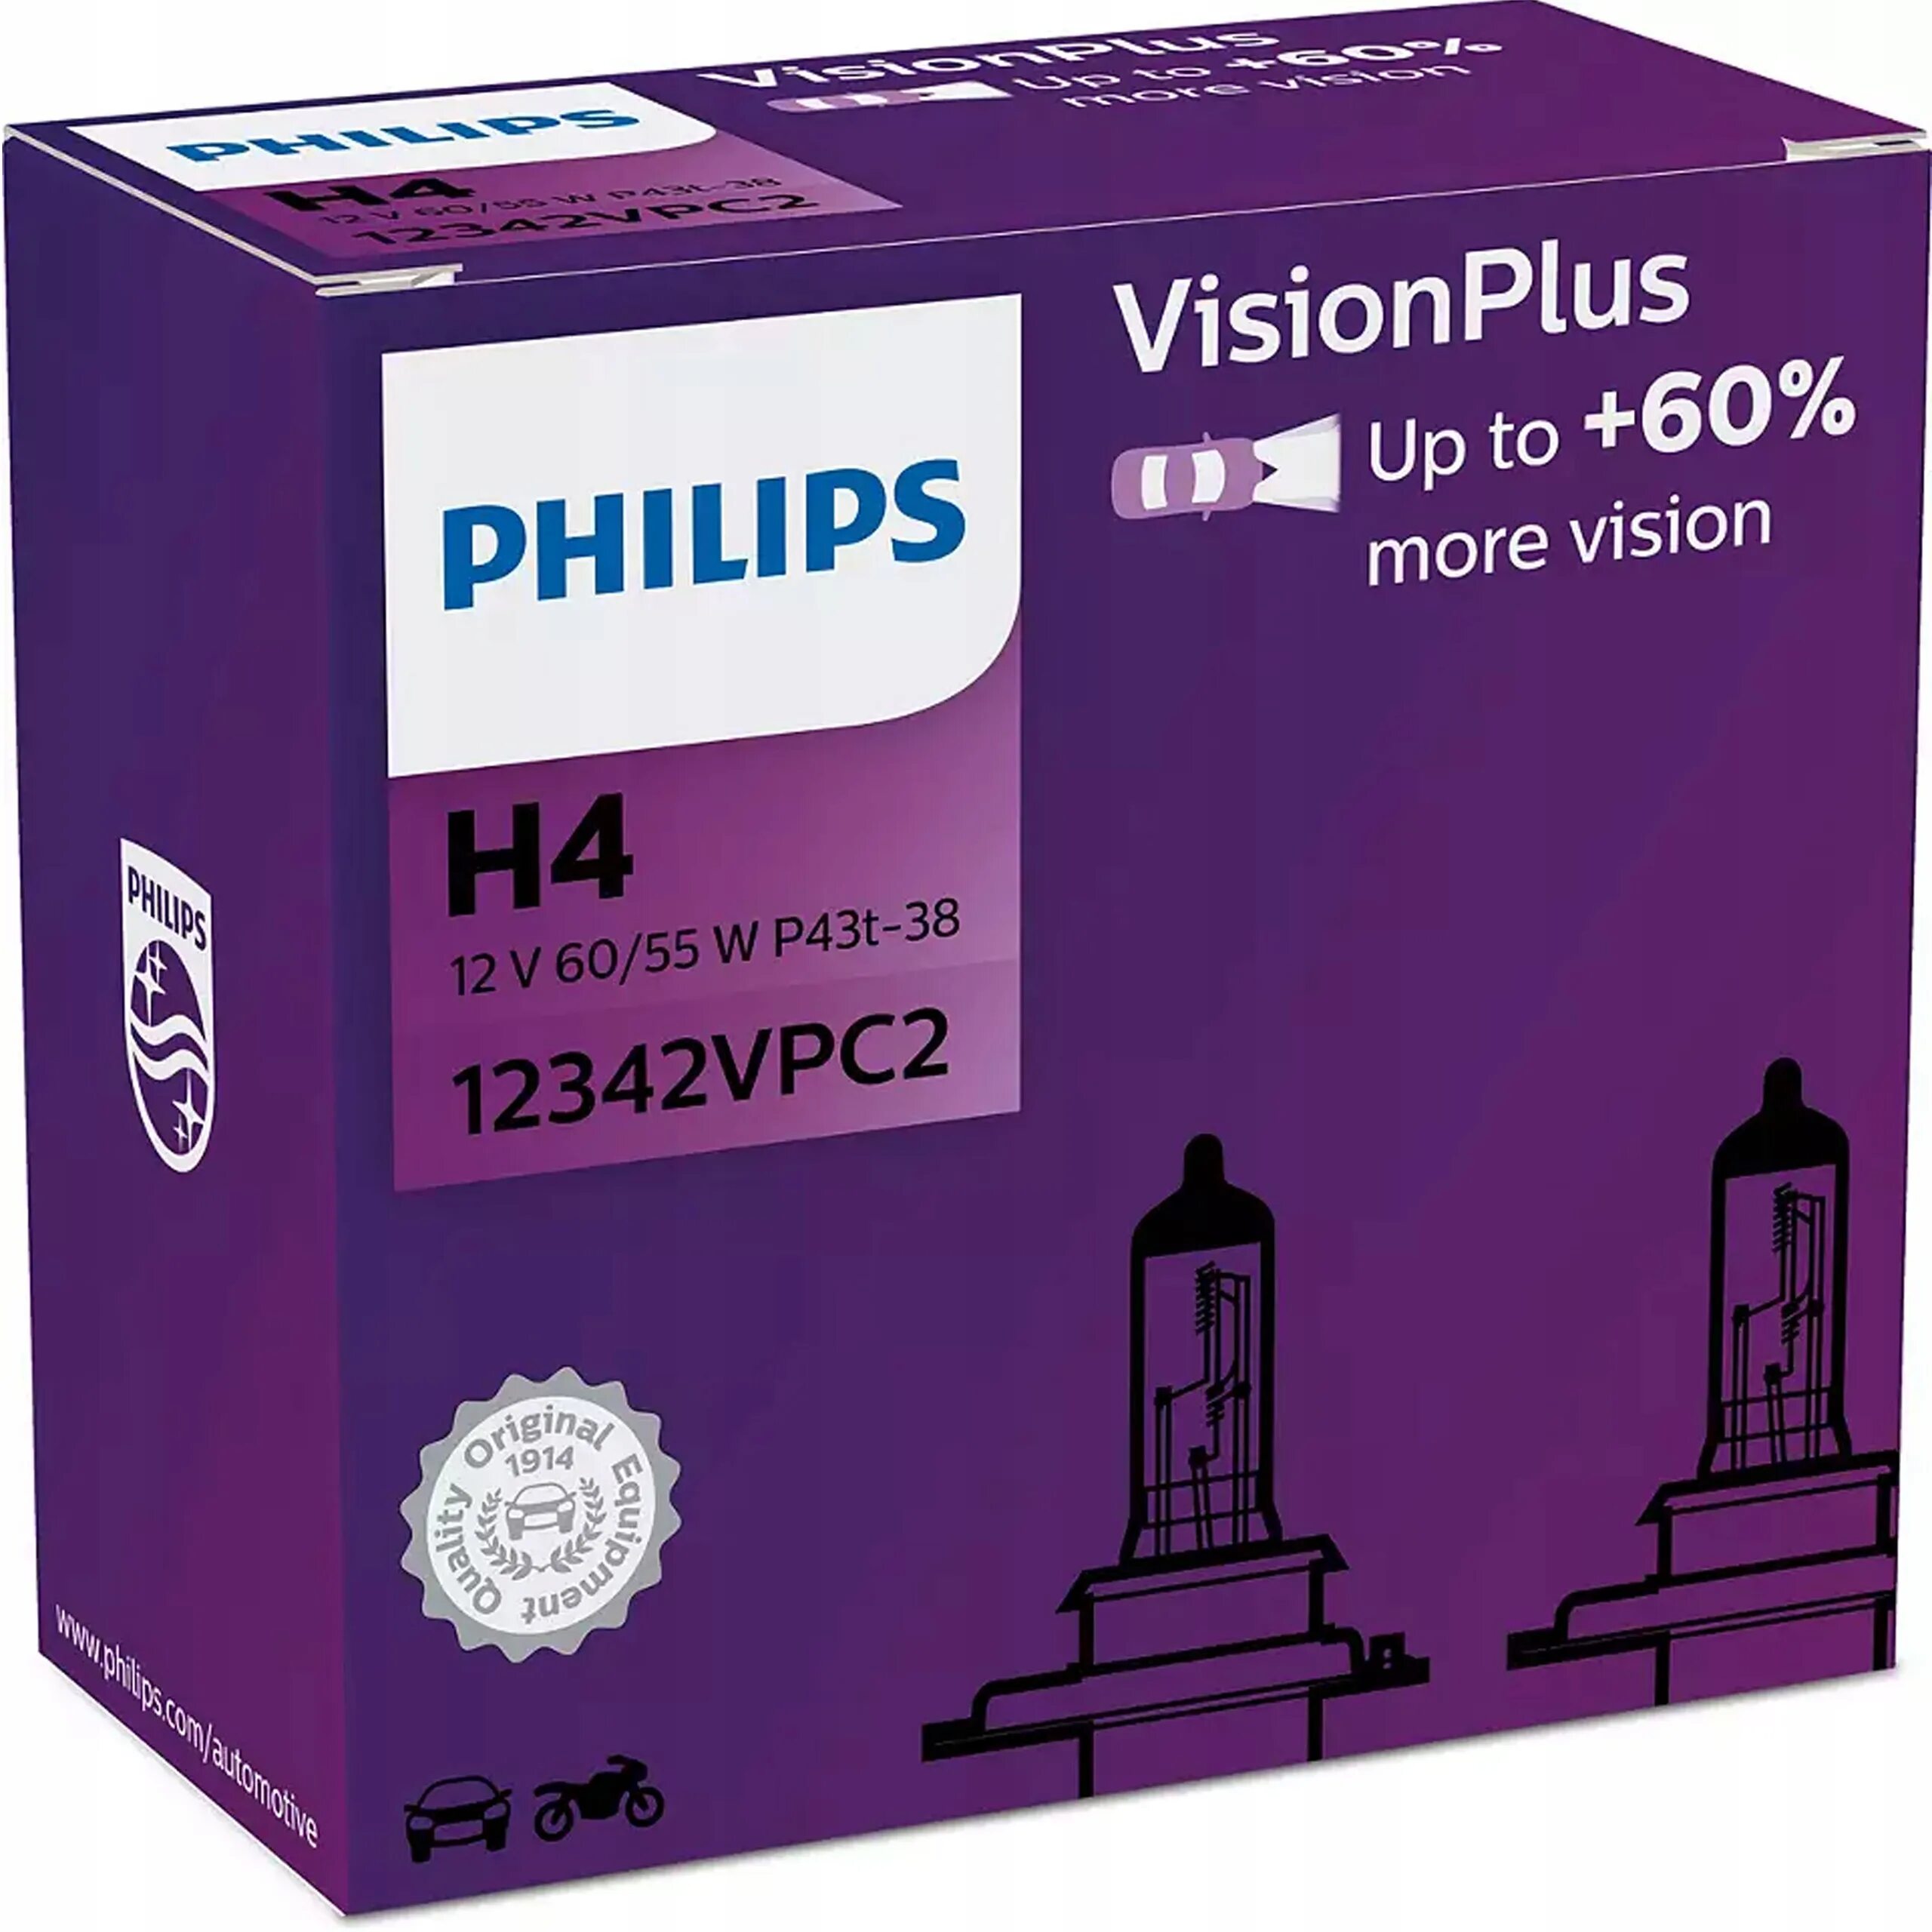 Philips Vision Plus h7. Philips h7 +60. Лампы Philips long Life h7 куар код. Philips Vision Plus пылесос.